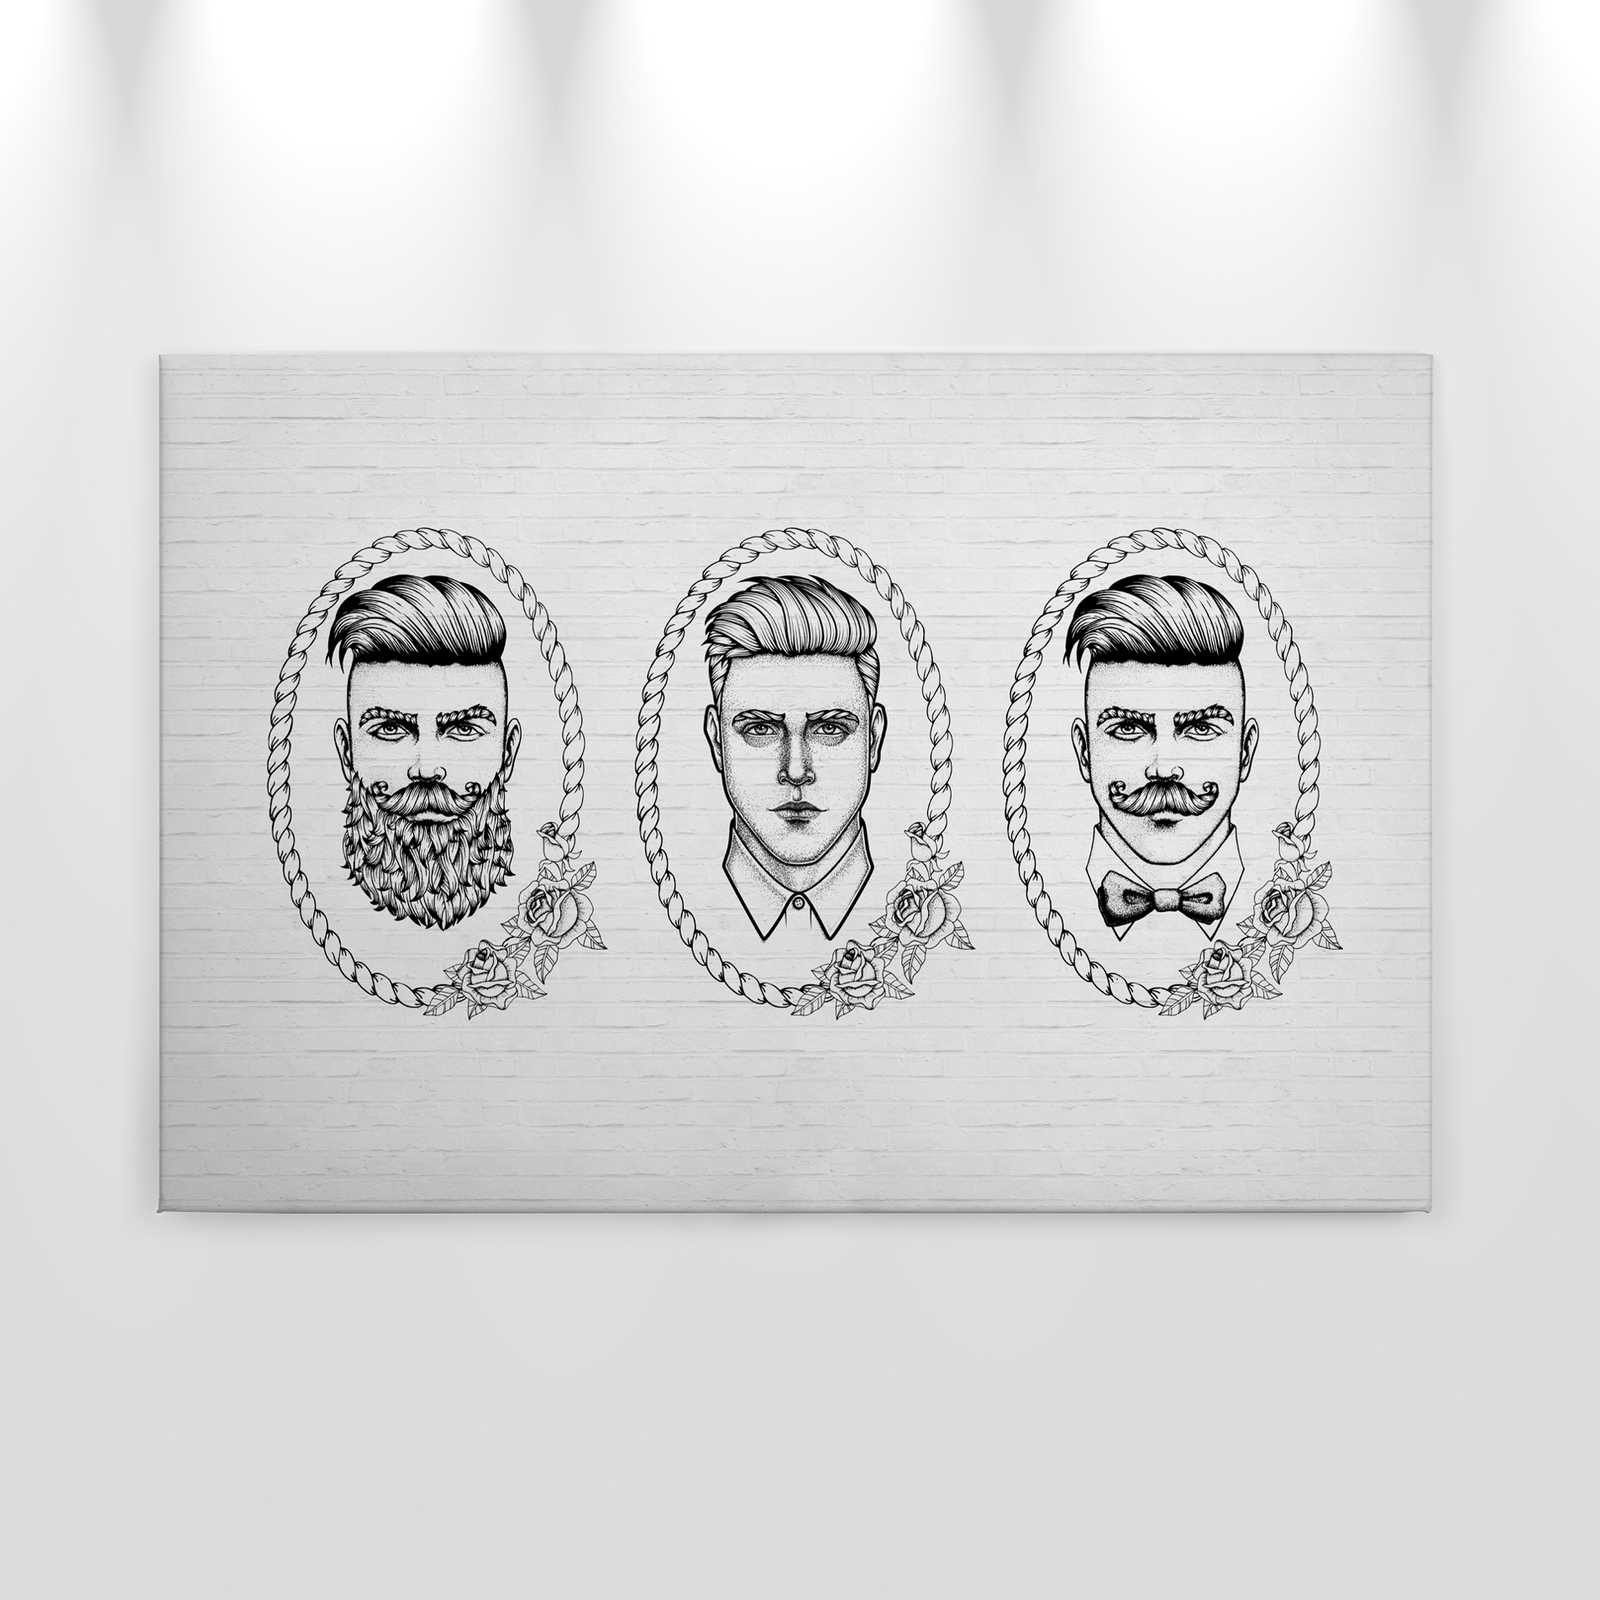             Black and white canvas painting with men portraits in comic style - 0.90 m x 0.60 m
        